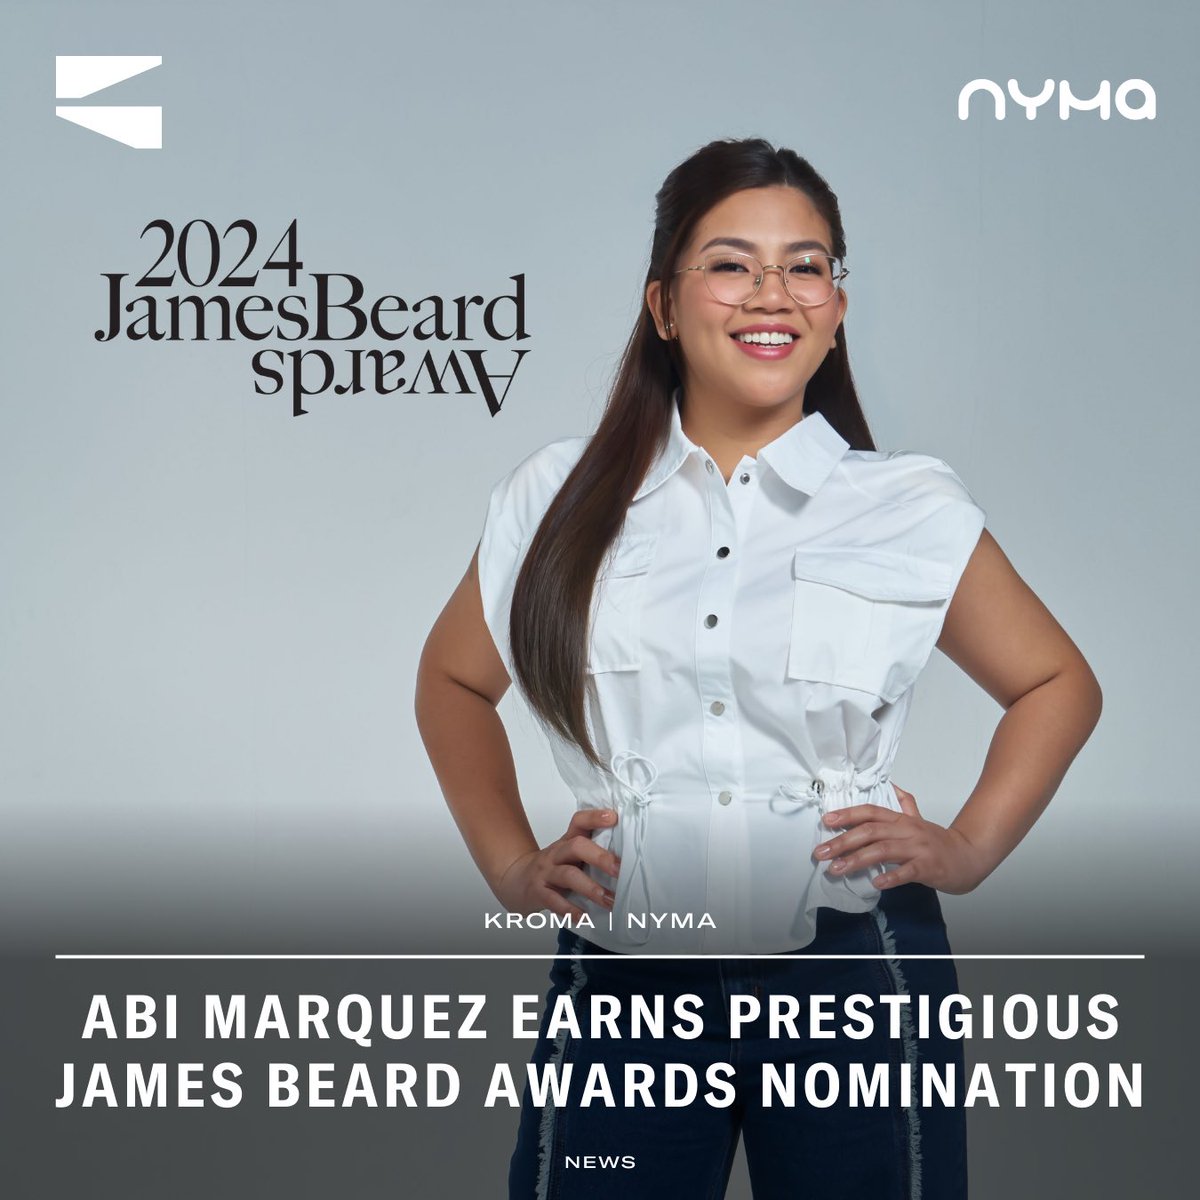 Lumpia Queen Abi Marquez has been nominated for the James Beard Media Awards in the Social Media Account category, a prestigious recognition for excellence in a food-centric social media account or platform. The @NYMA_MGMT talent shared her excitement on Facebook, describing